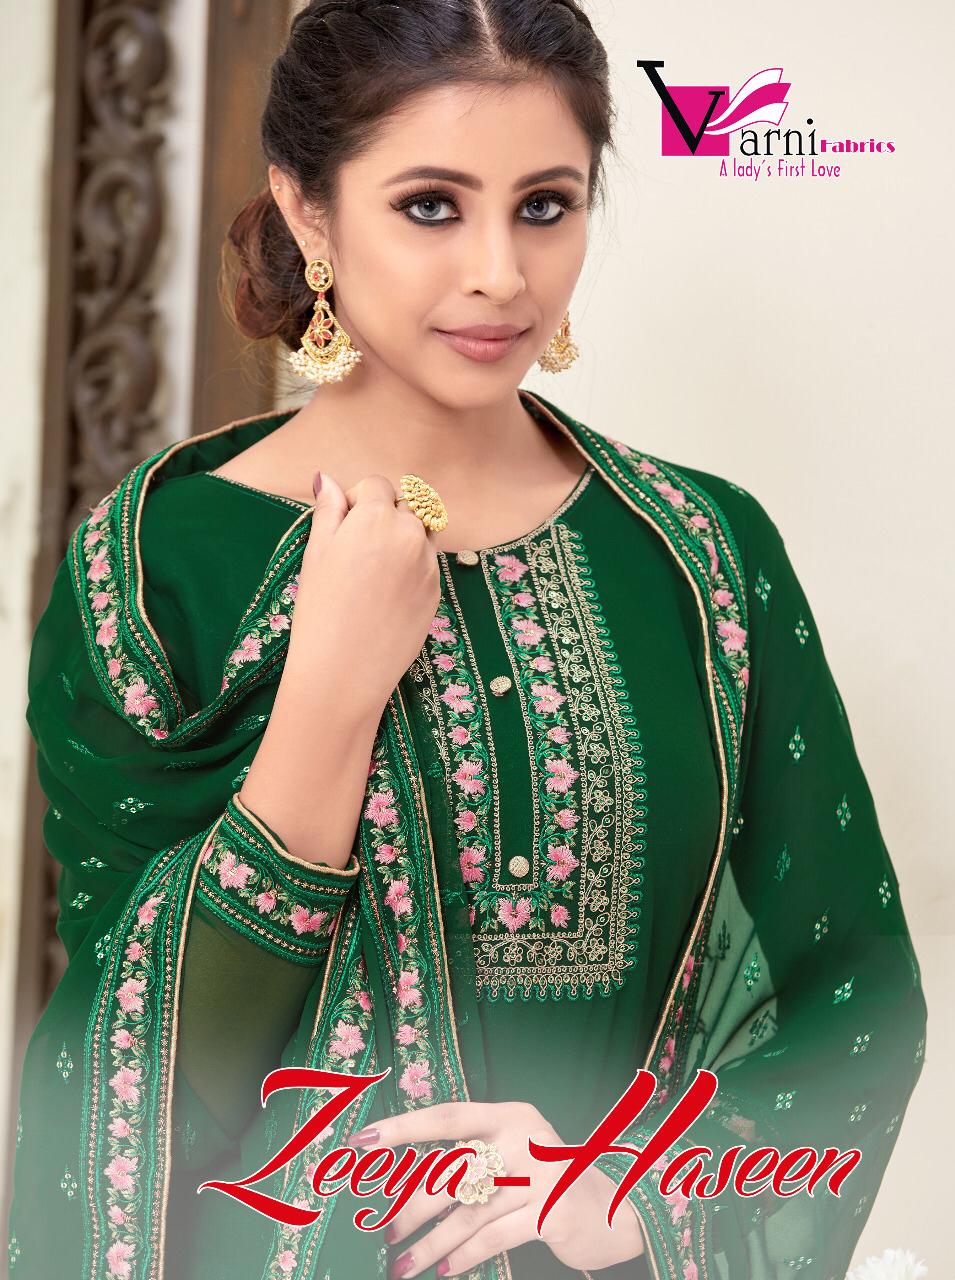 Varni Fabrics Zeeya Haseen 1301-1304 Series Soft Georgette With Heavy Embroidery Suits